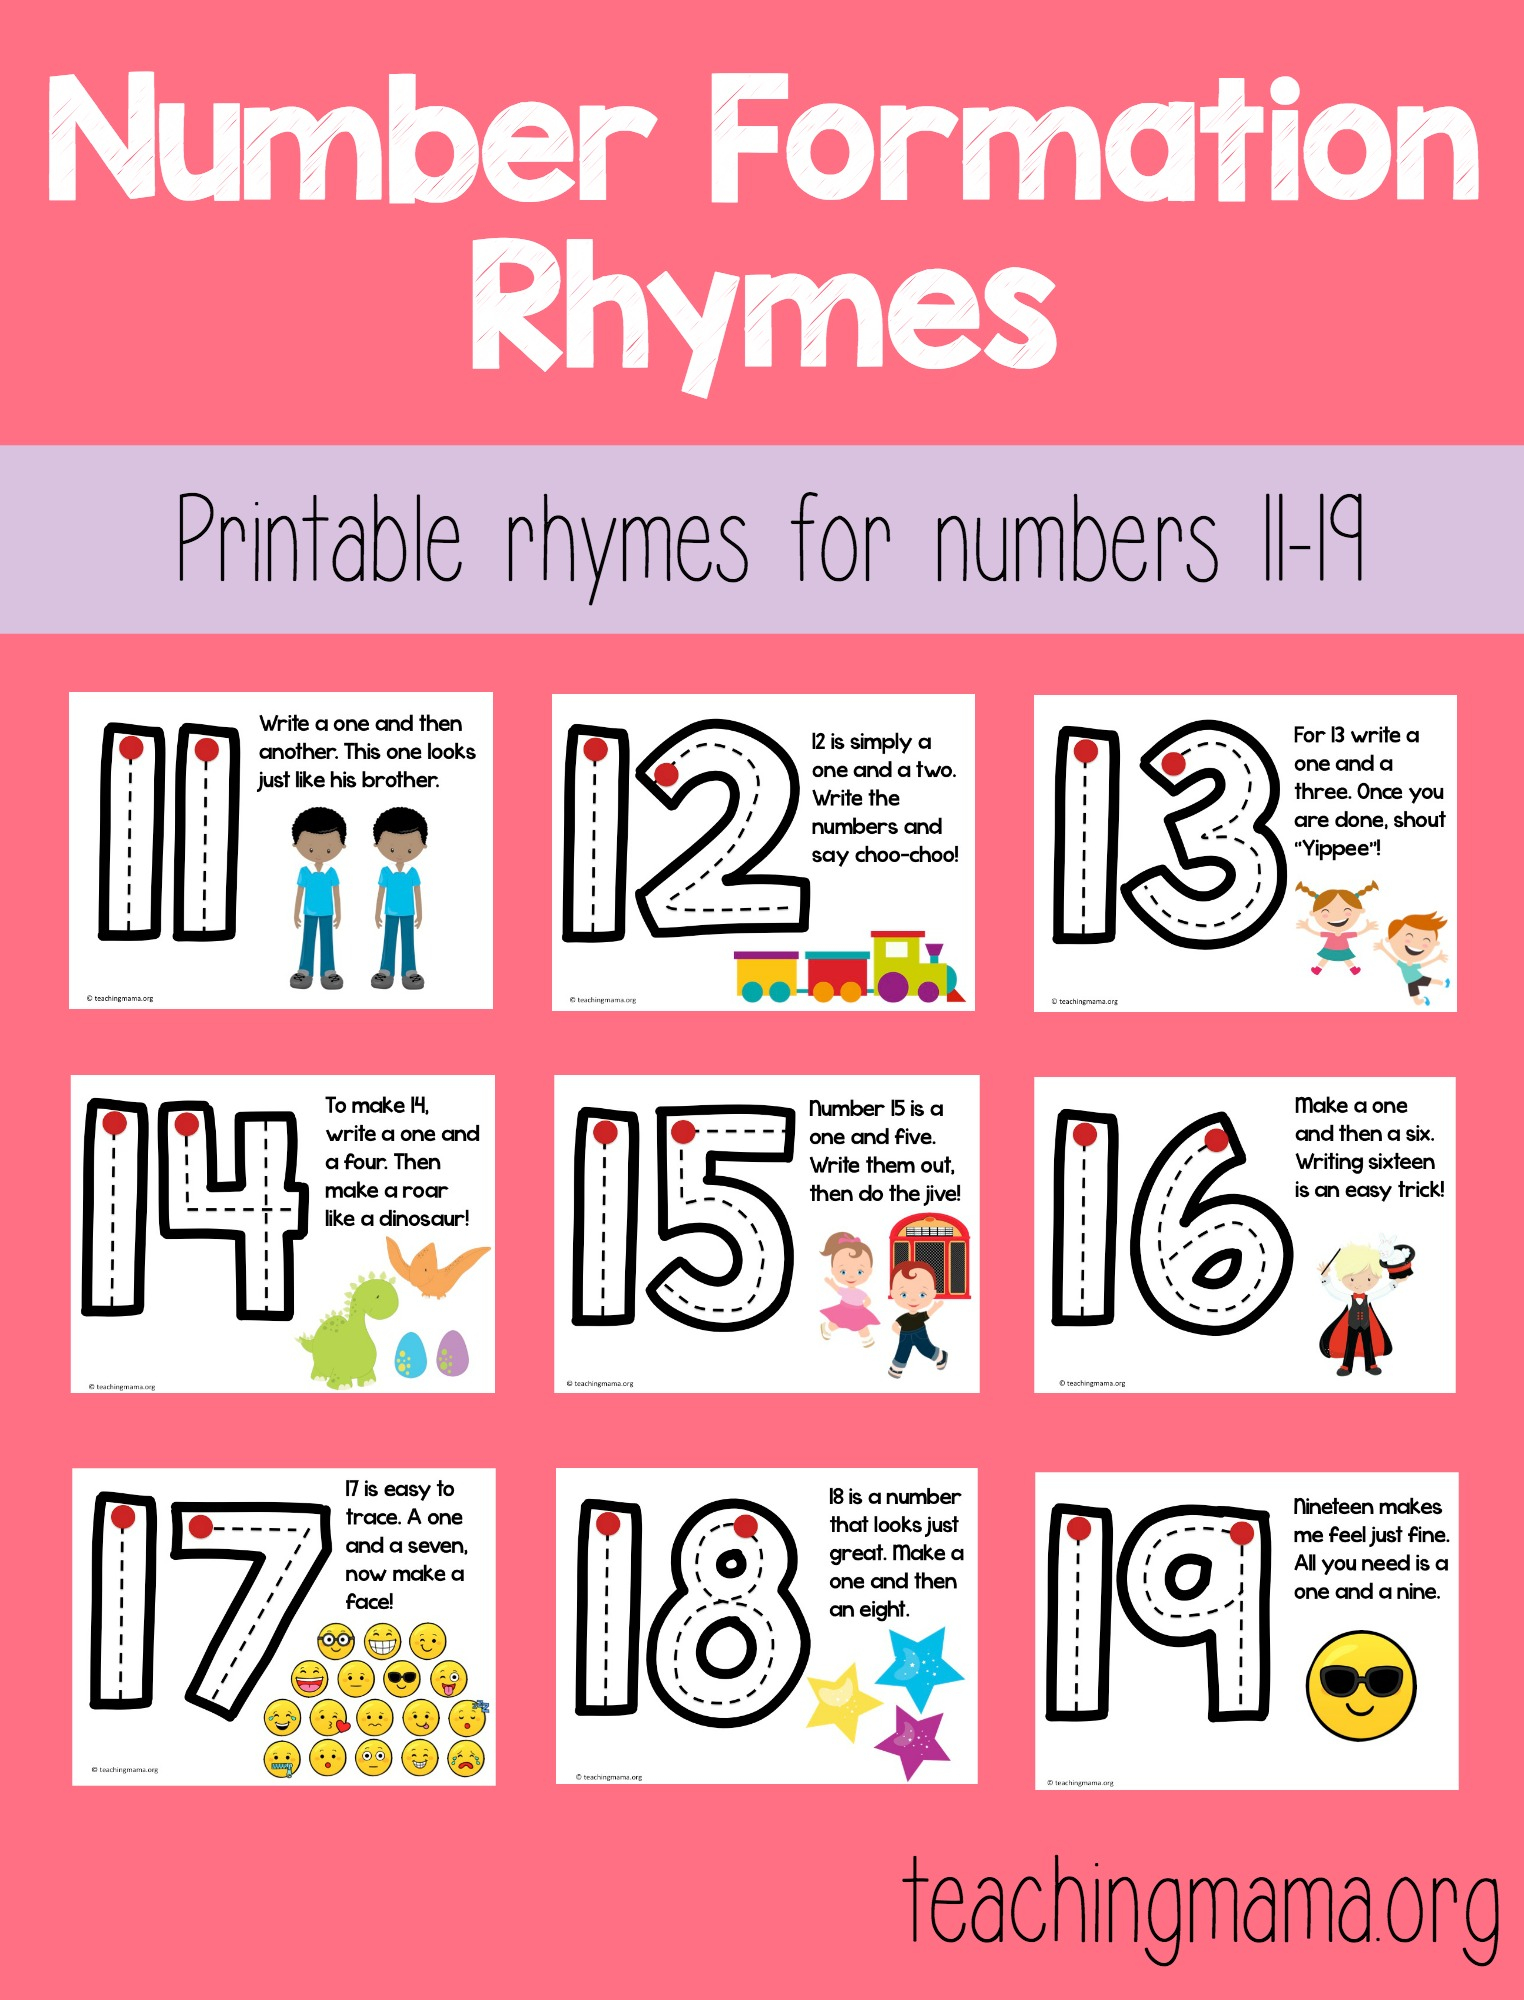 Number Formation Rhymes For 11-19